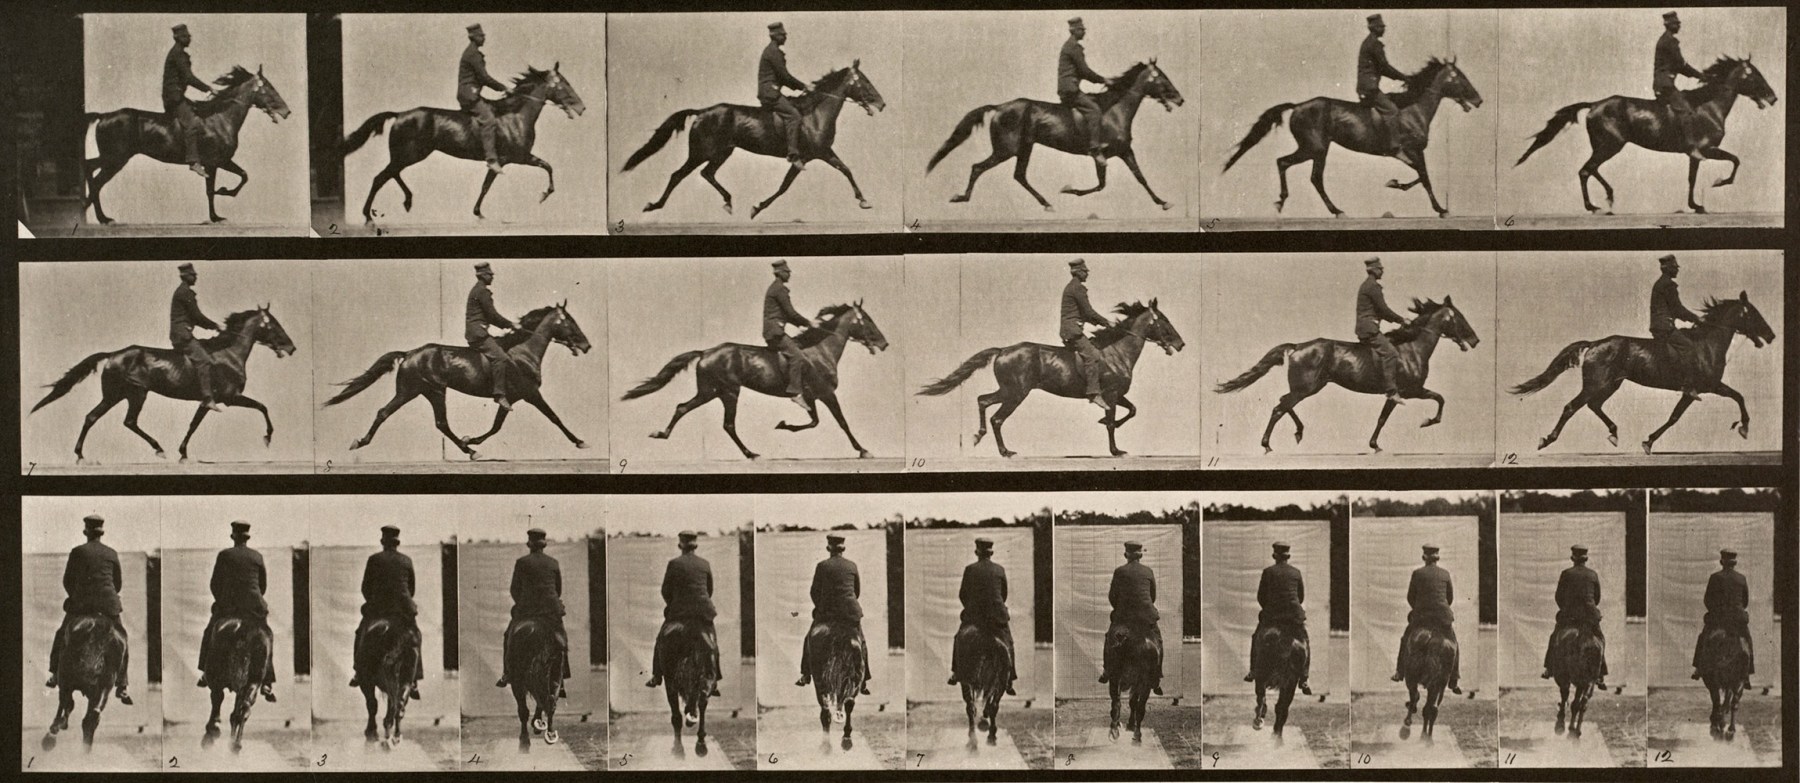 Sequence of black and white photos showing the movements of a trotting horse with a rider